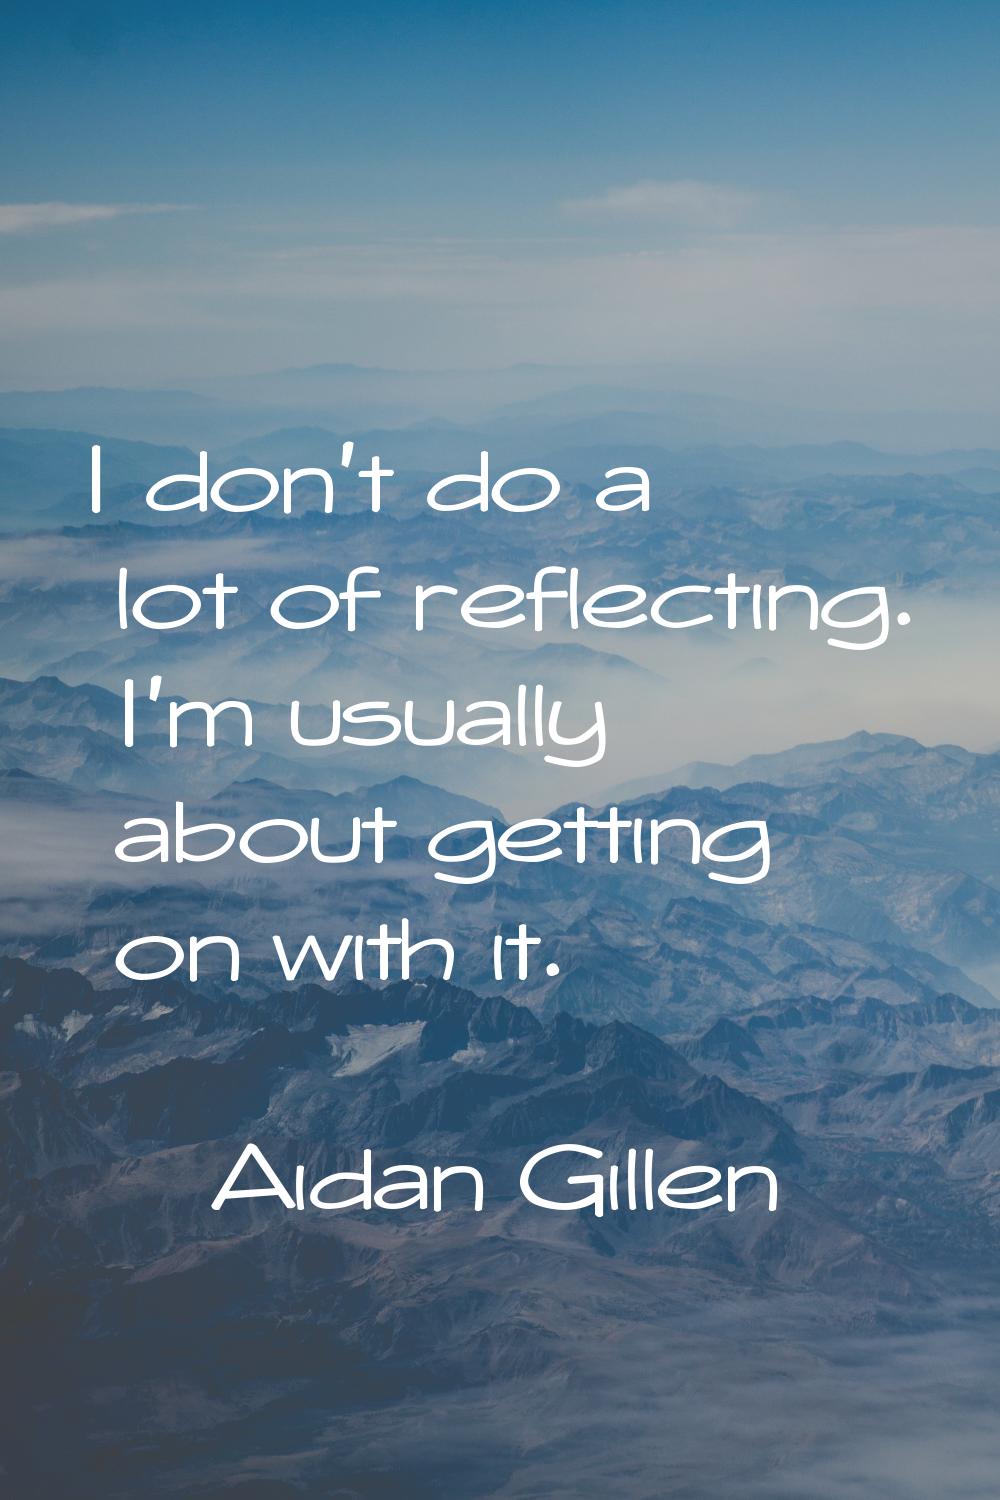 I don't do a lot of reflecting. I'm usually about getting on with it.